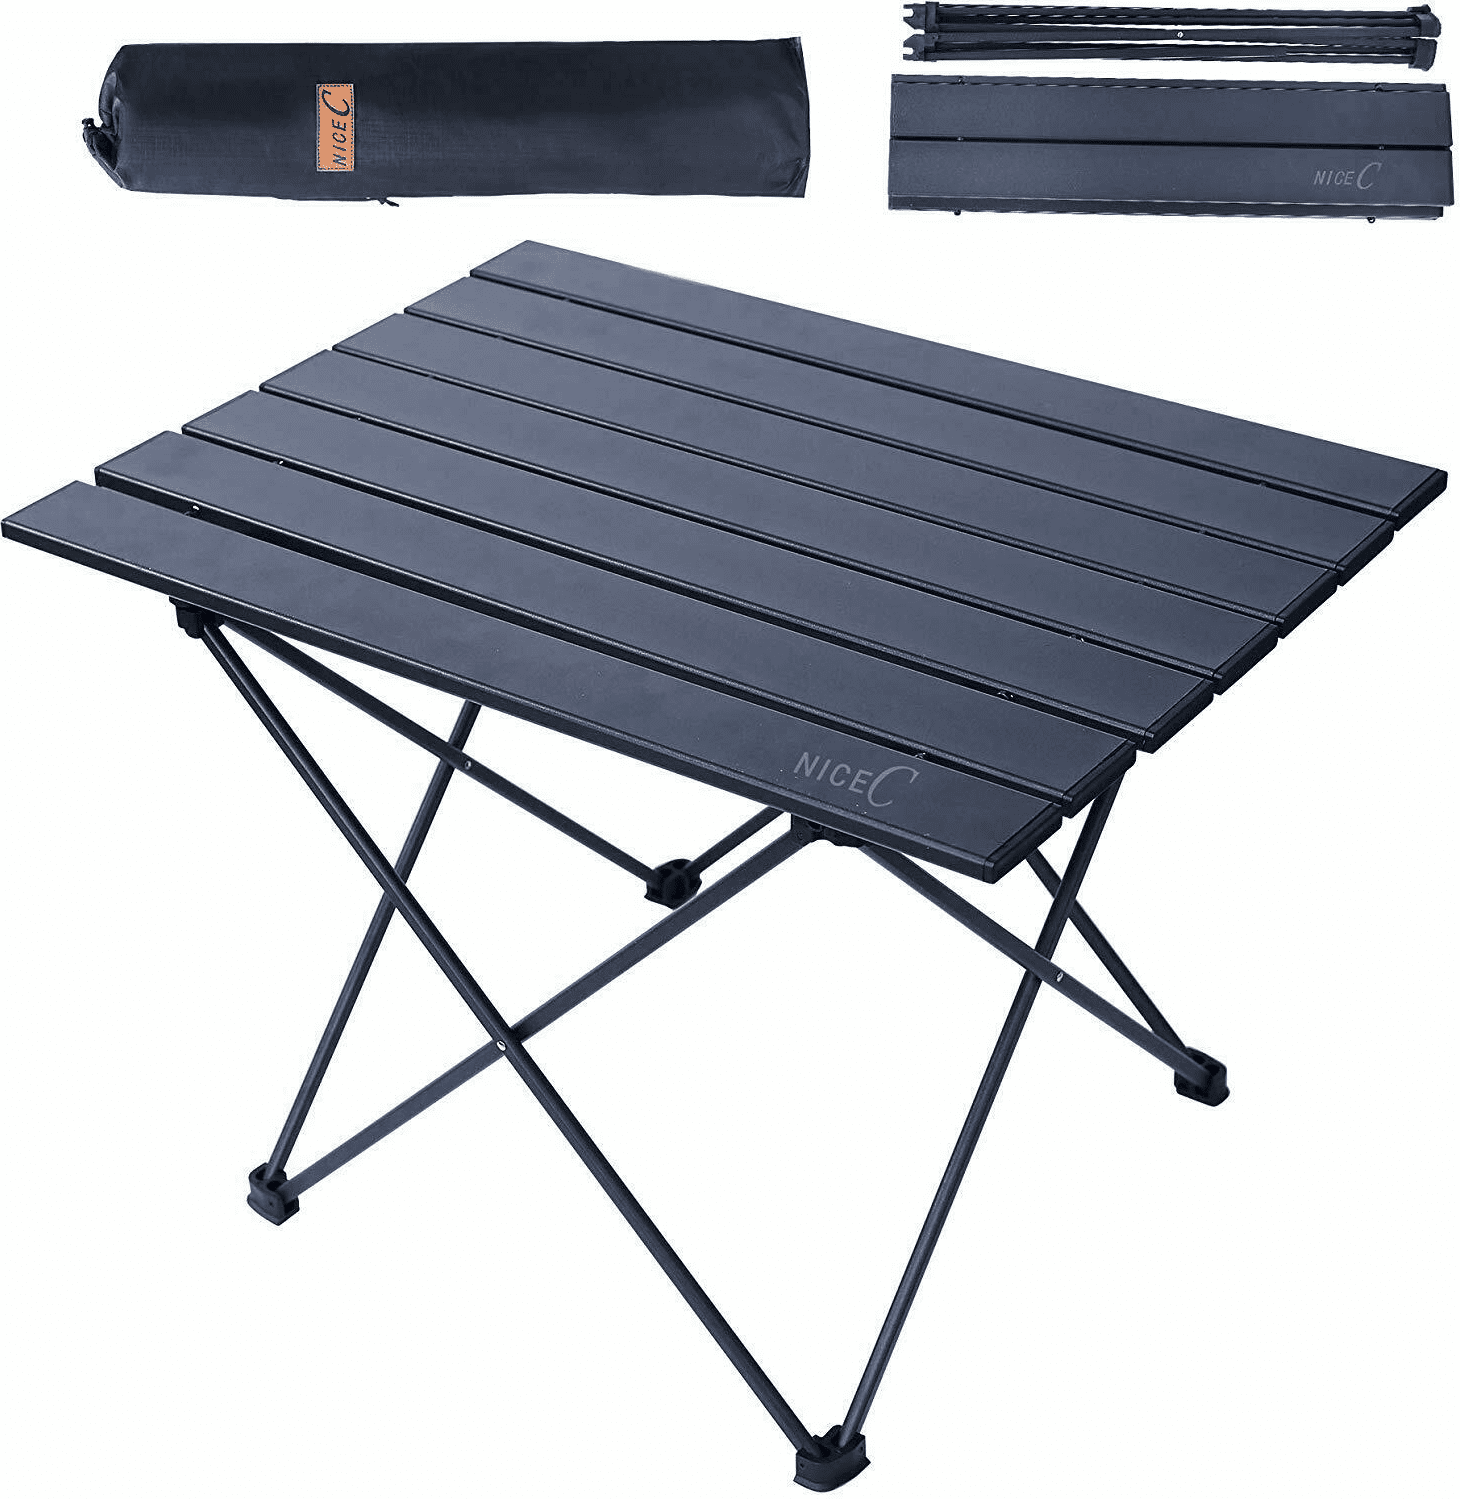 Portable Folding Aluminum Table Lightweight Camping Picnic with Bag Outdoor 